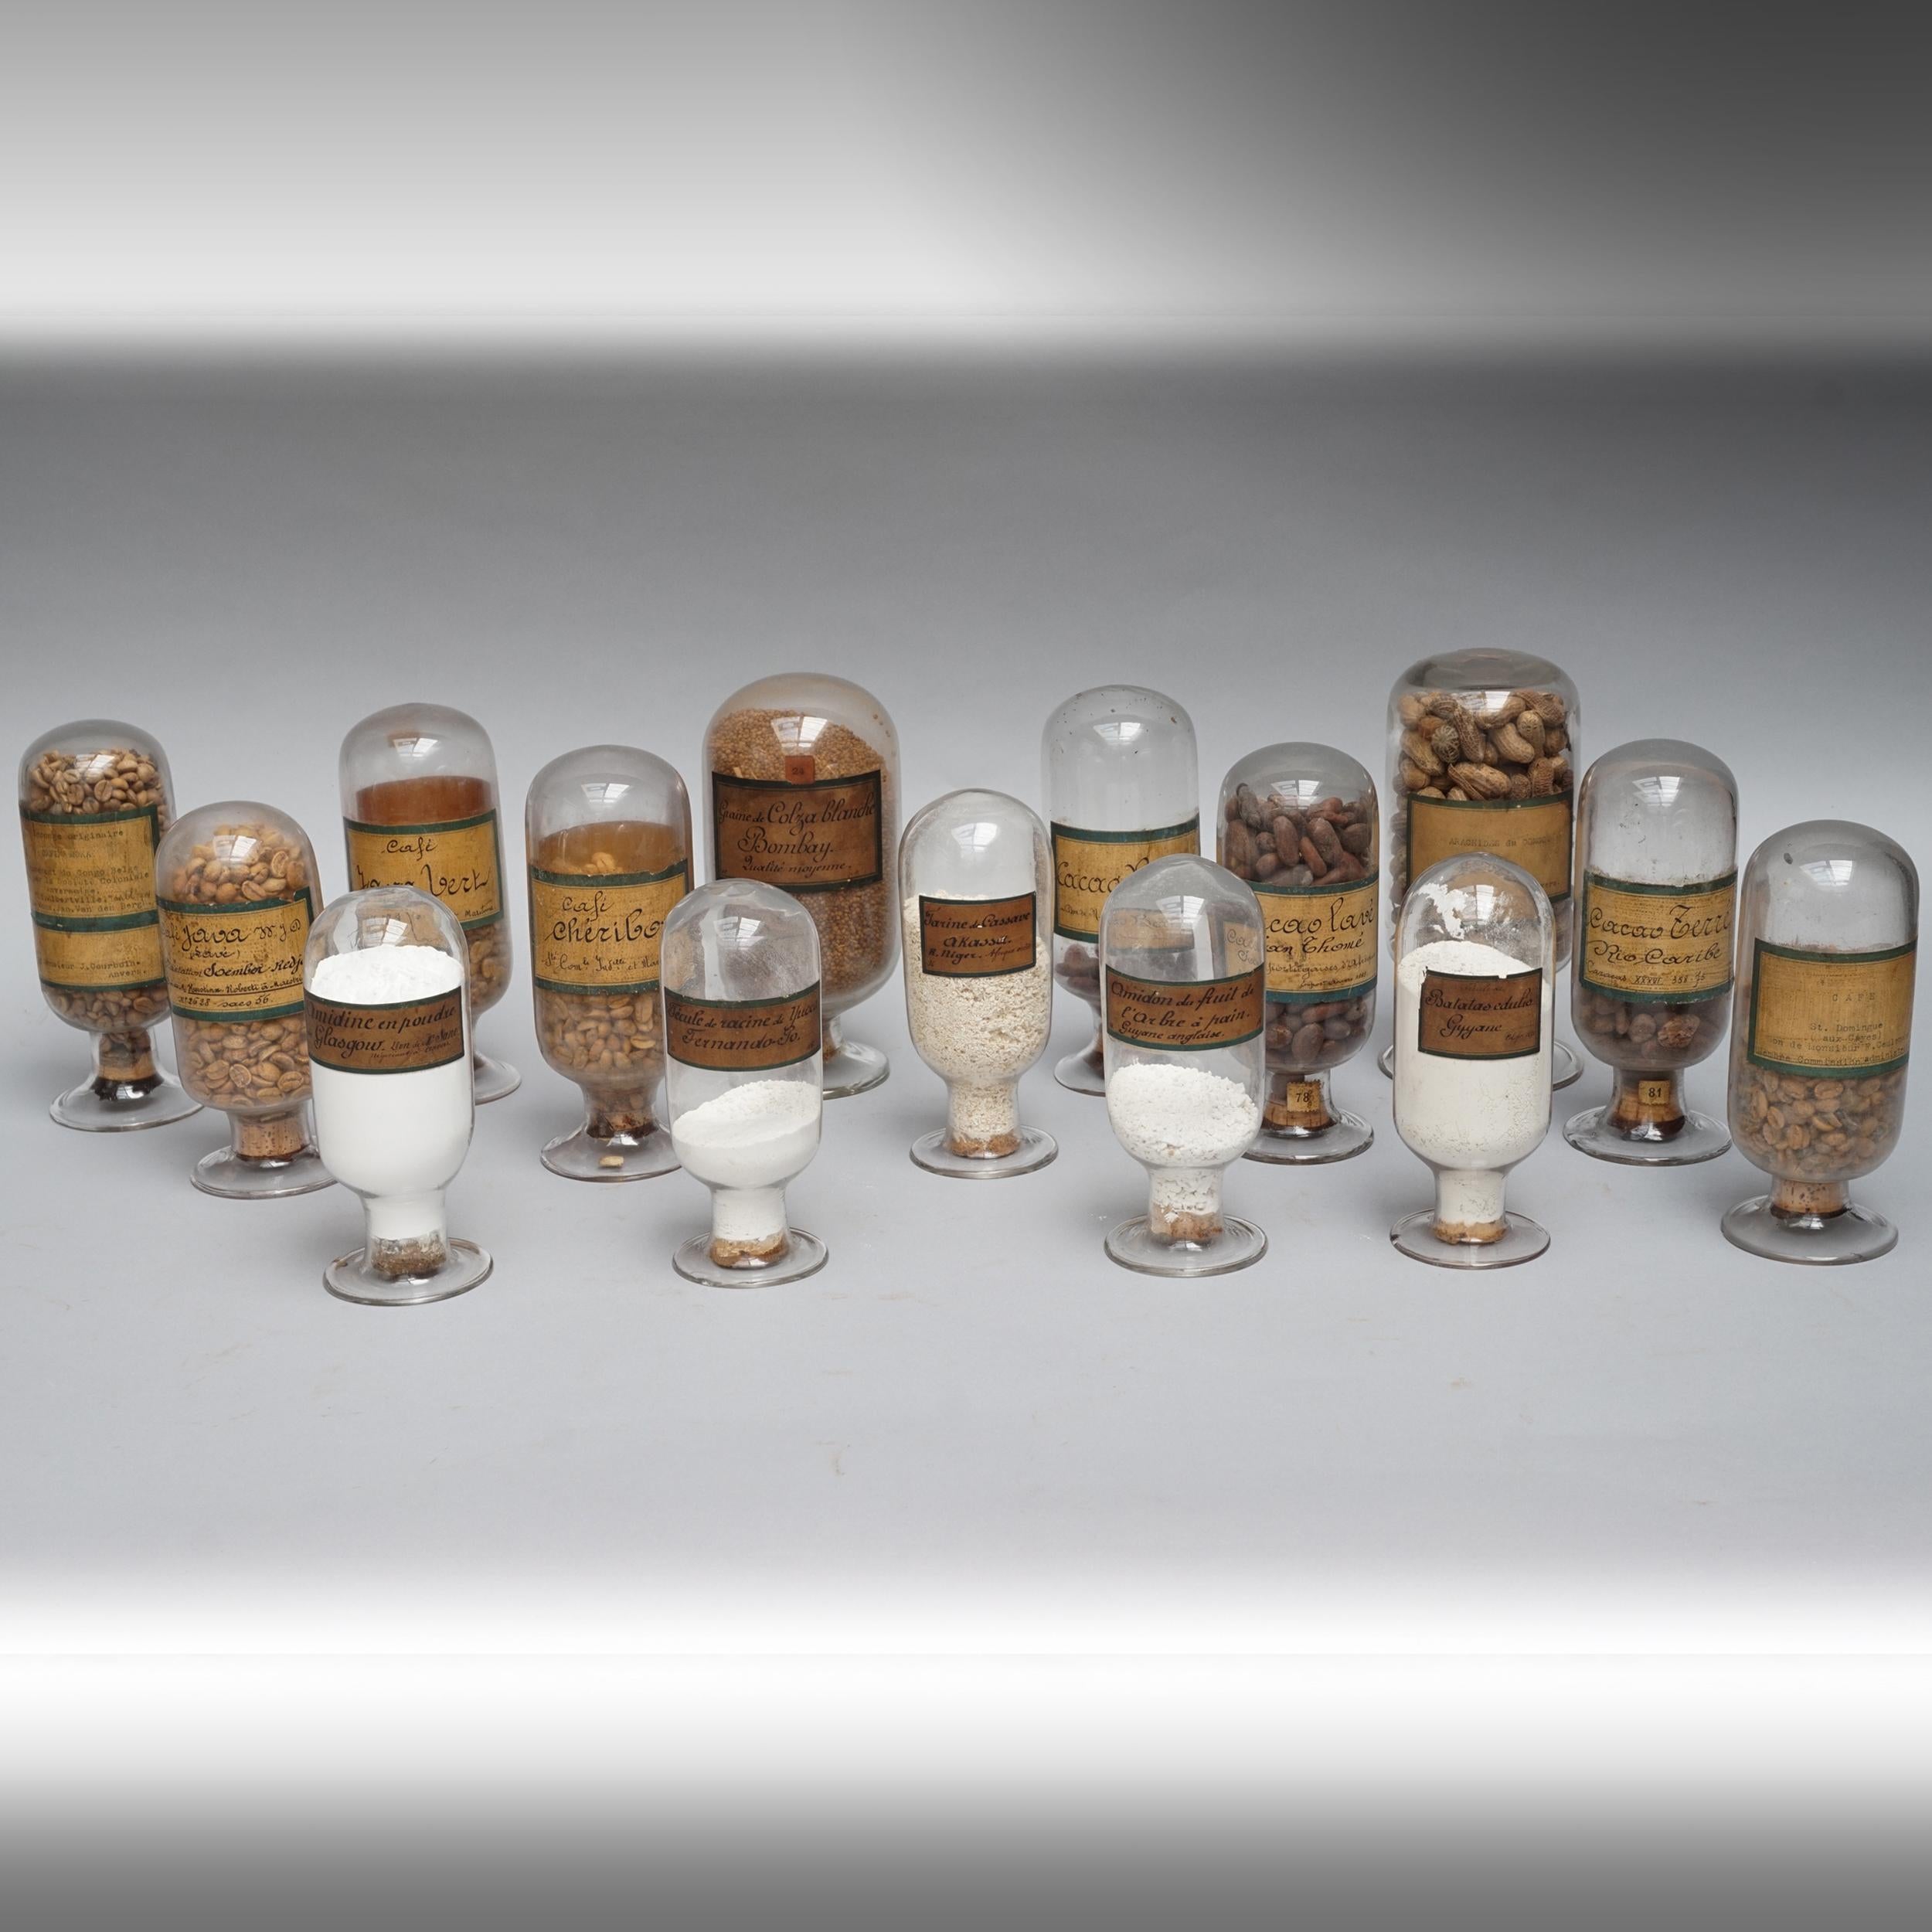 15 blown glass containers with Colonial natural commodities like coffee, cacao, peanuts, rapeseed and different kinds of yam, breadfruit, cassava, and yucca flours.

The glass containers contain natural resource samples of different Dutch,